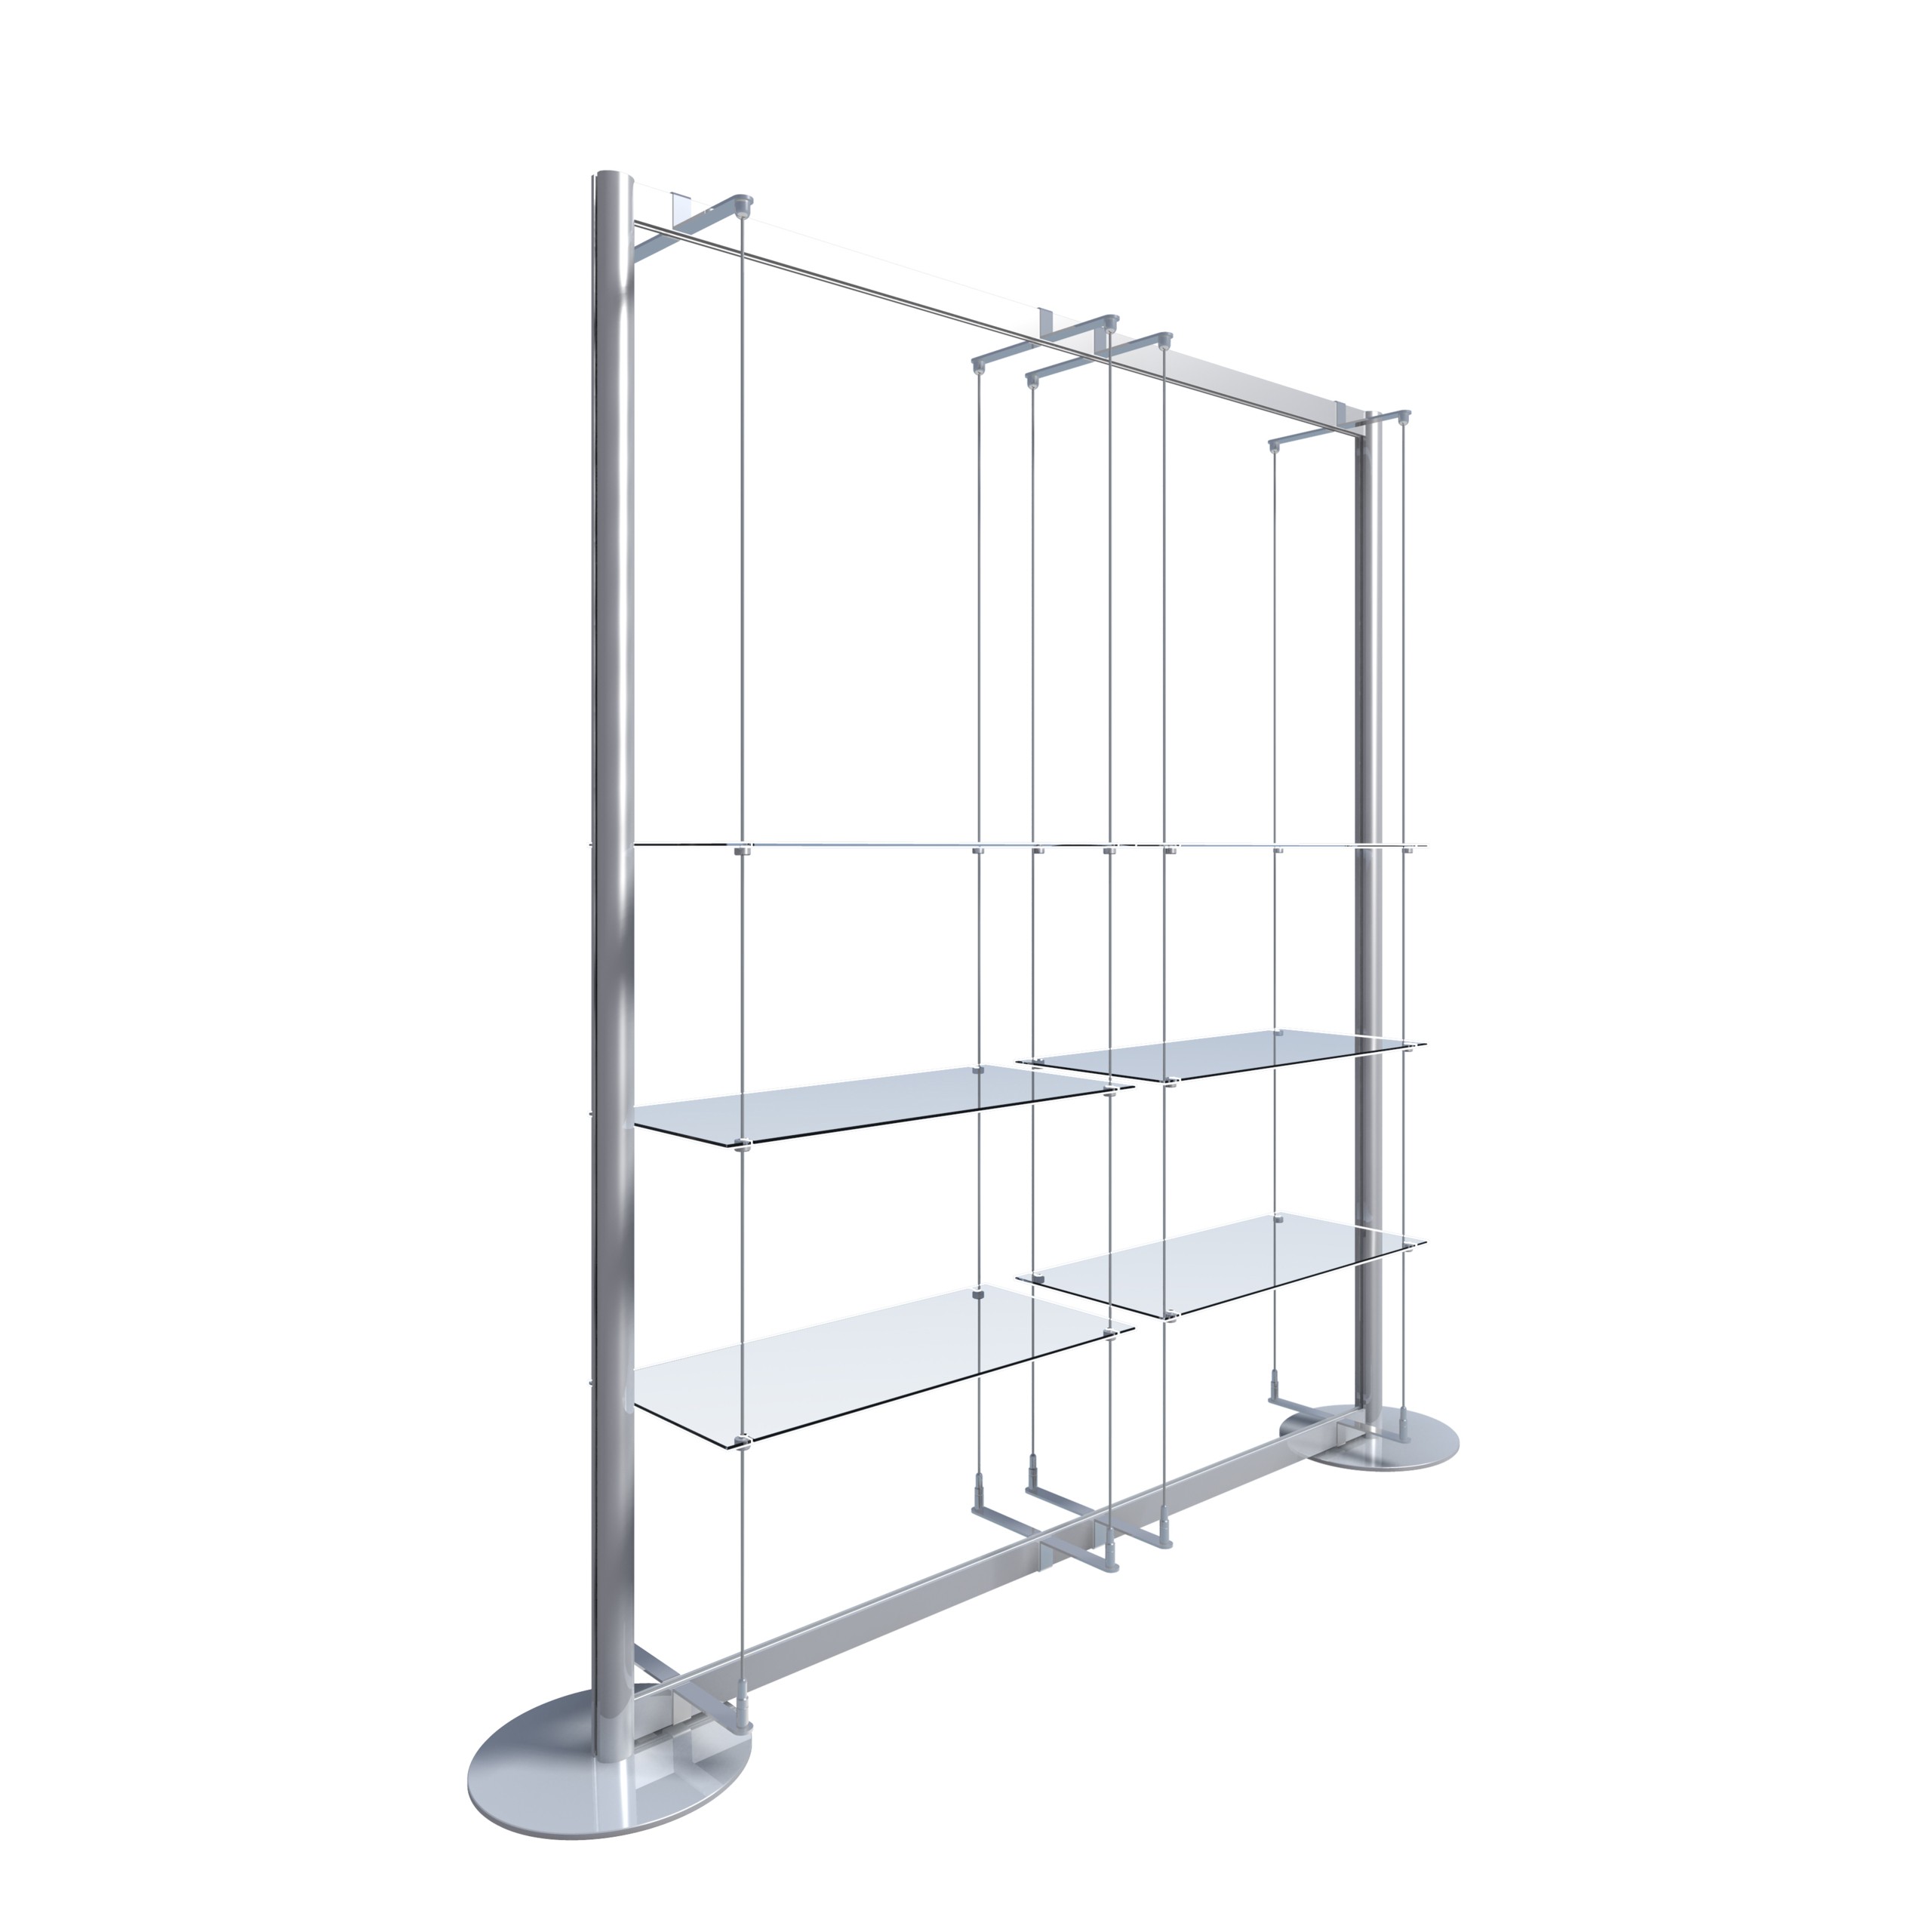 Free standing frame kits with glass shelves